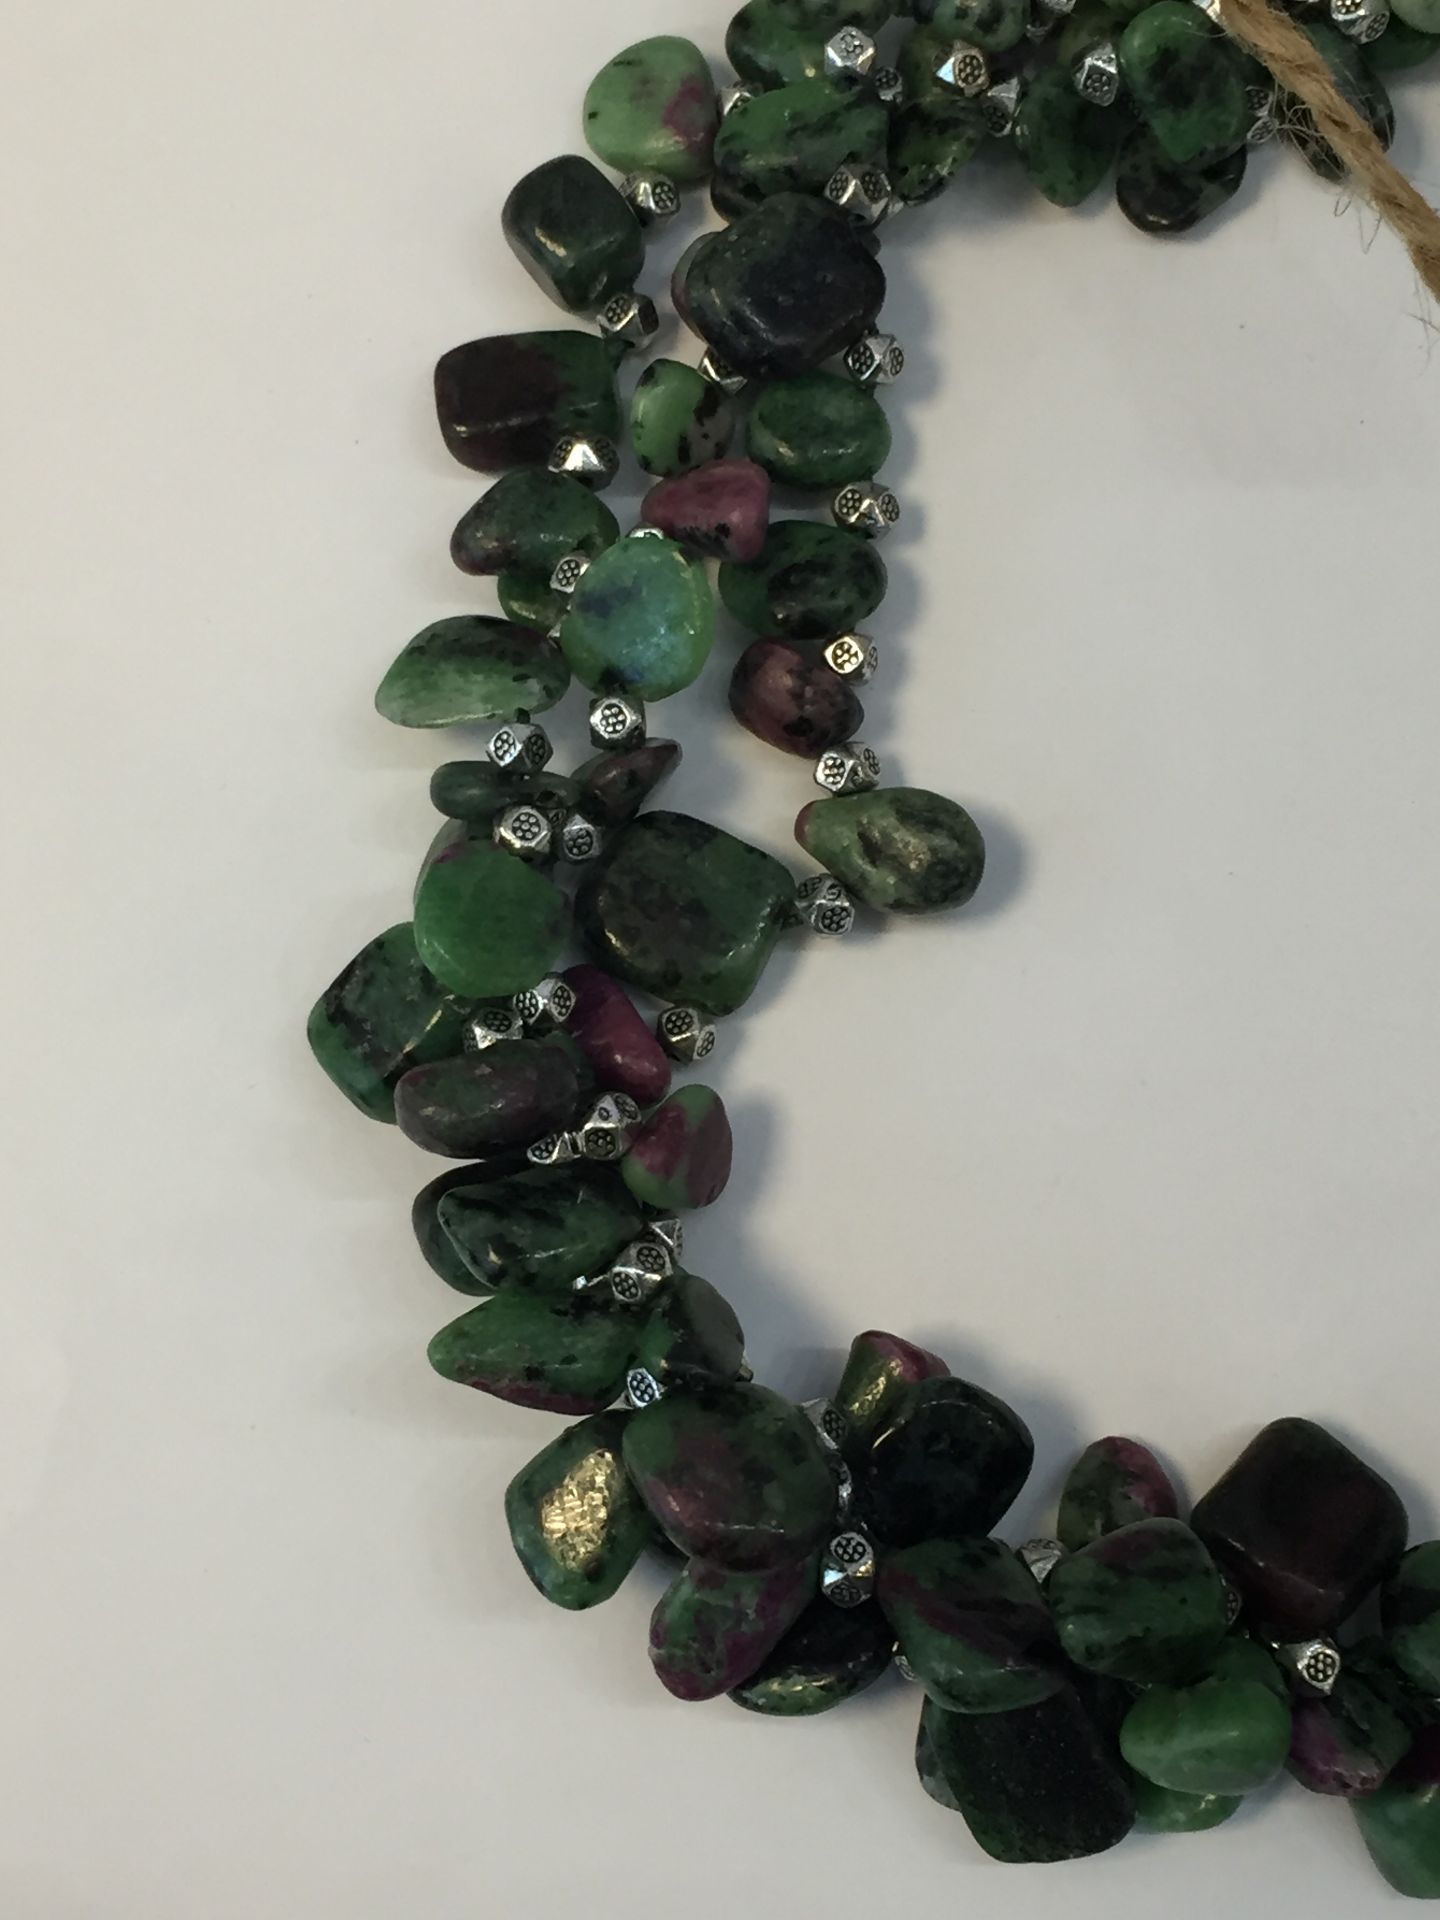 Natural Statement Necklace Jewellery Ruby Zoisite, Tigers Eye, Amethyst - Image 2 of 2